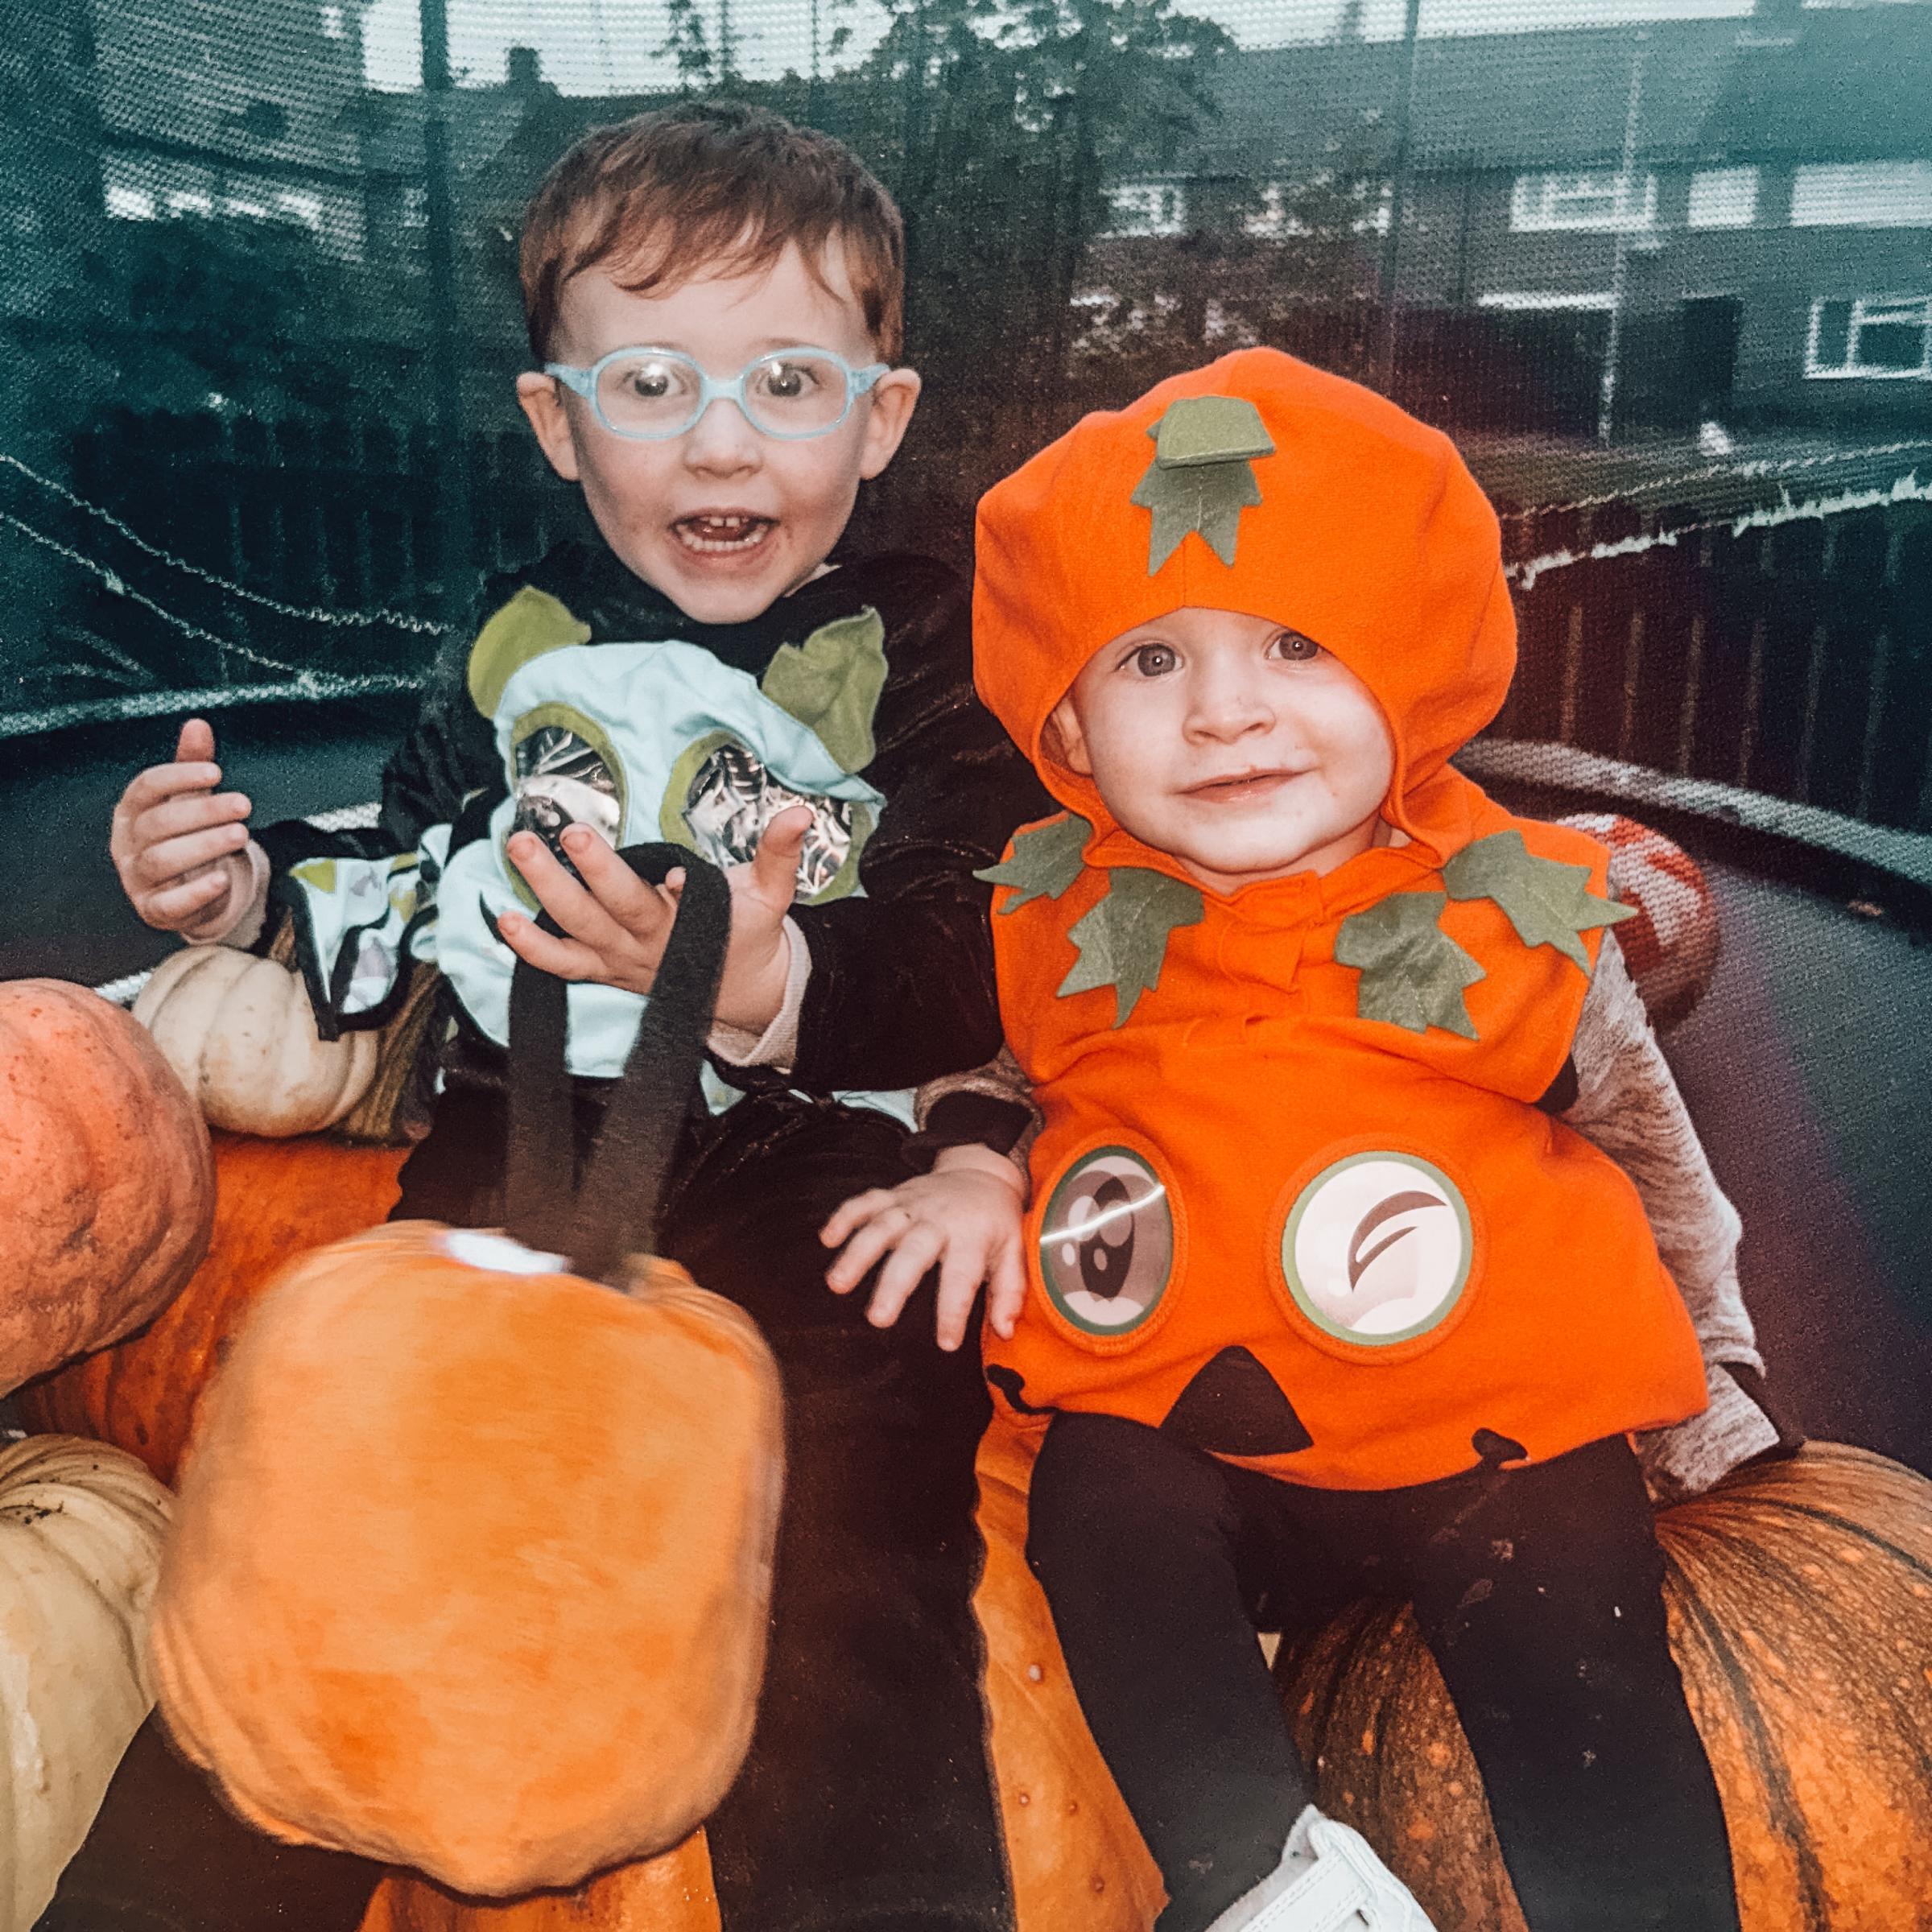 Lucas and Jaxon Healey-McDaid dressed as a bat and a pumpkin from Knutsford